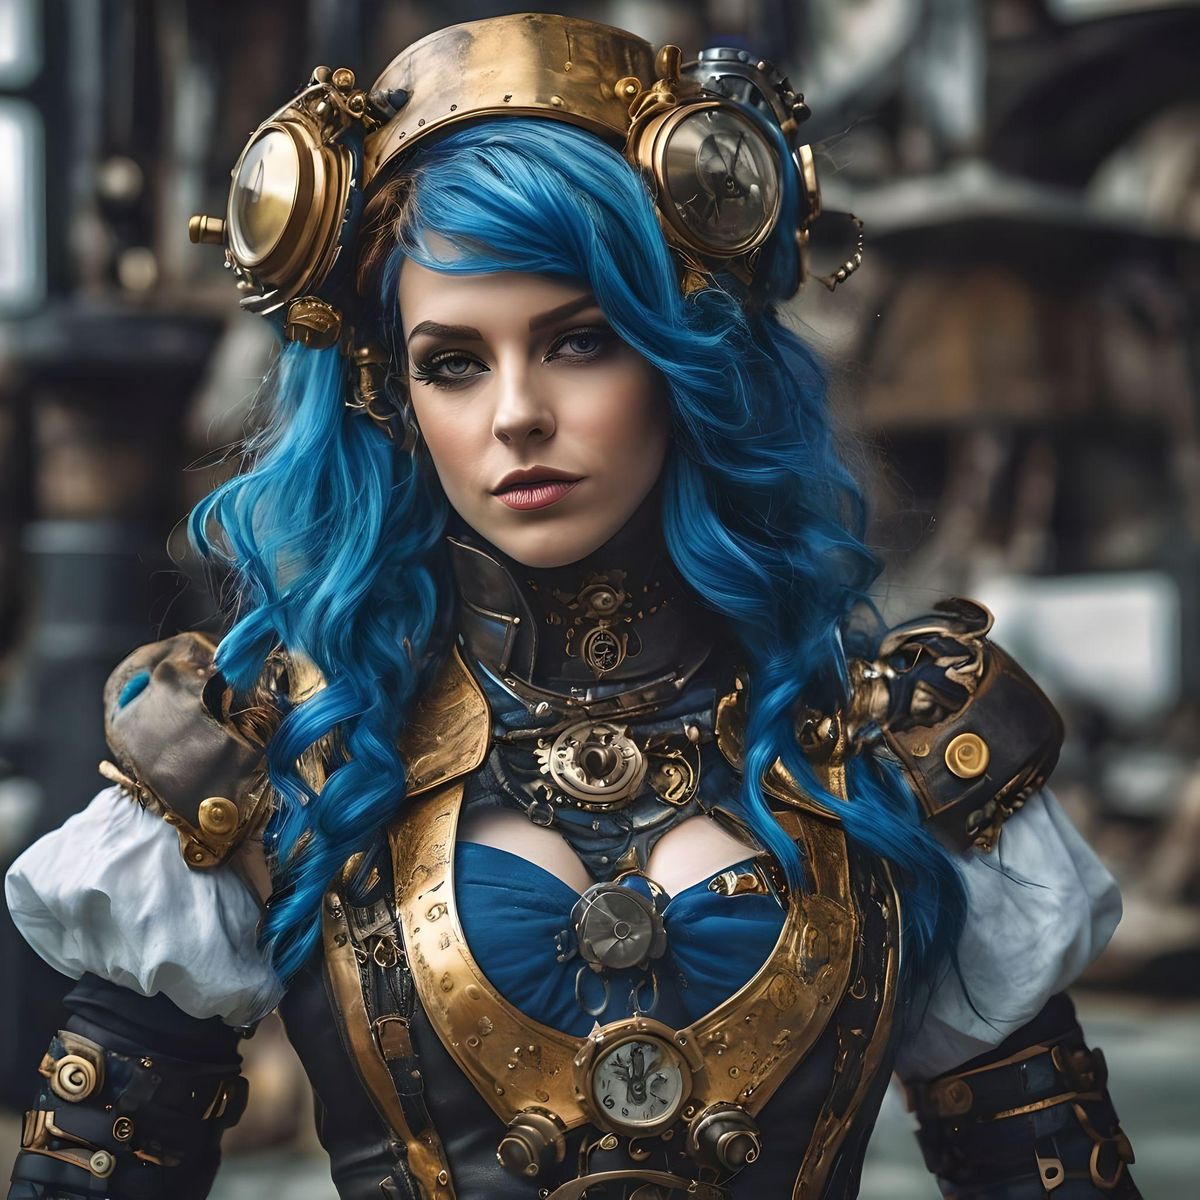 steampunk woman
with blue and gold hair